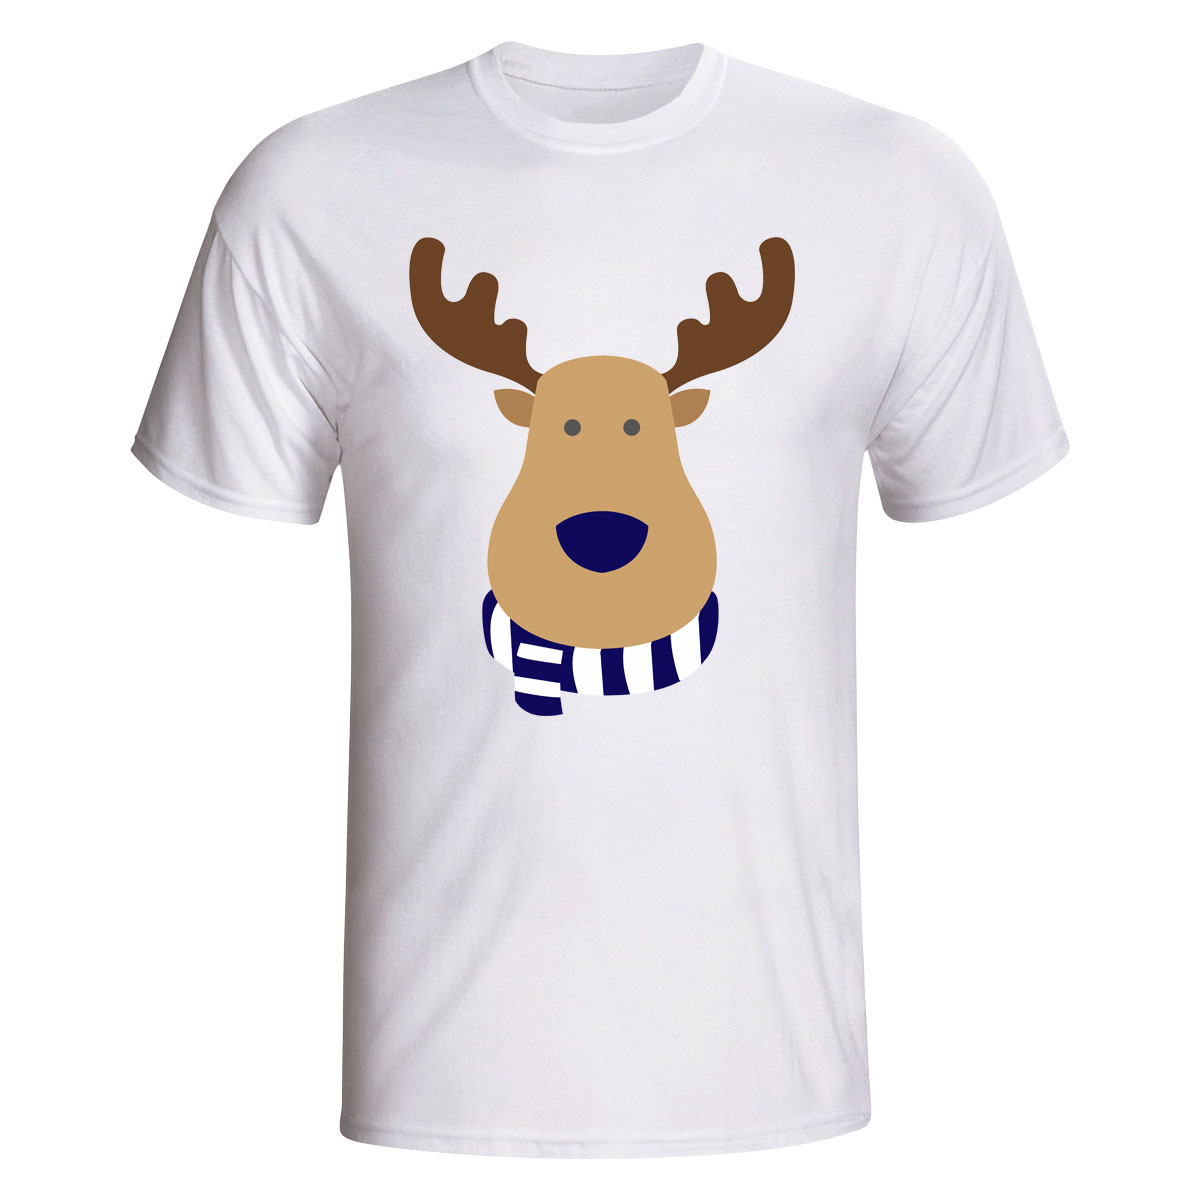 West Brom Rudolph Supporters T-shirt (white) - Kids